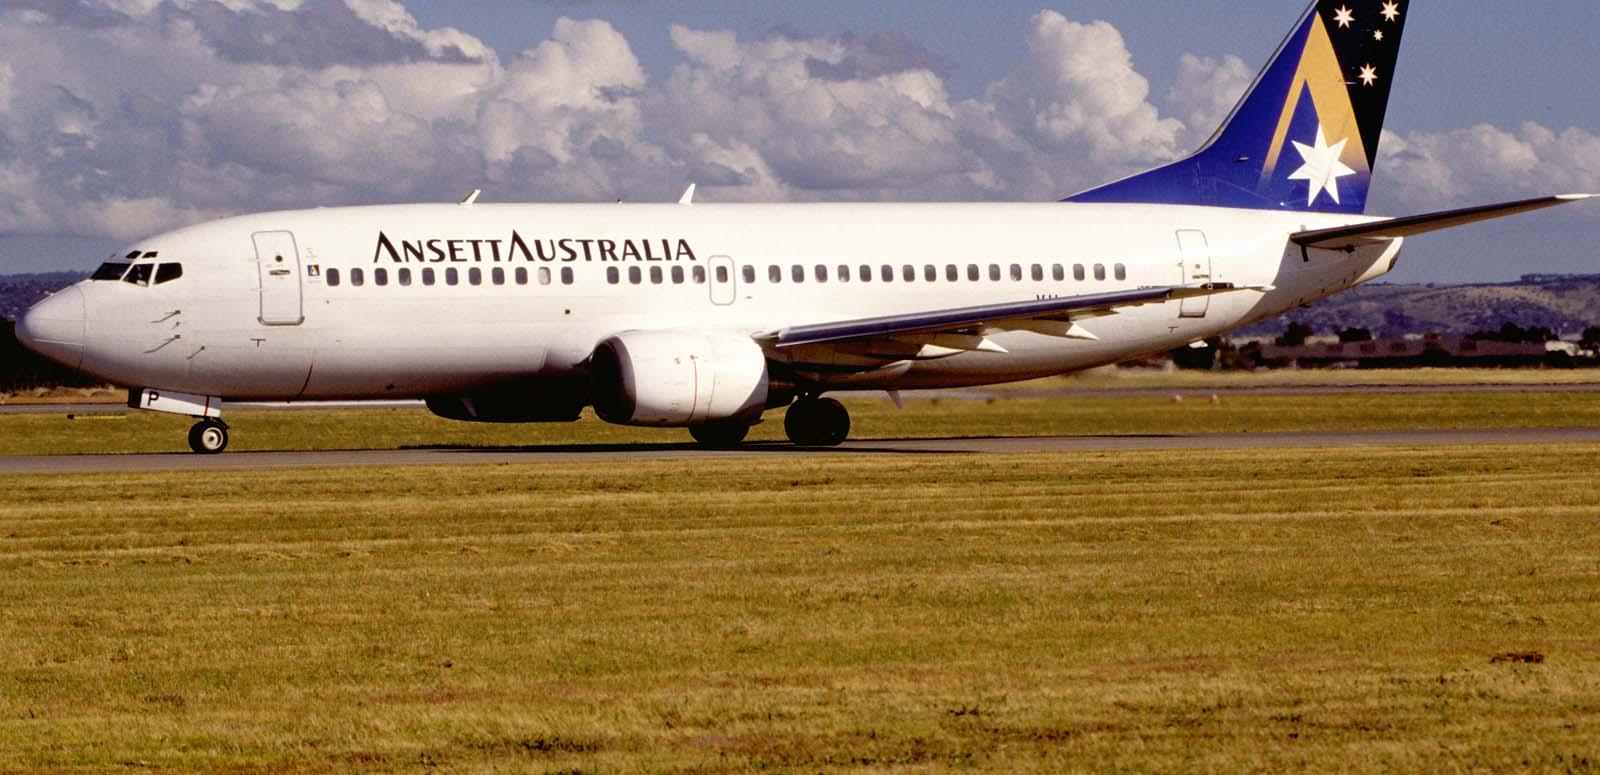 Ansett Australia Boeing 737-300 airplane on a runway on a sunny day